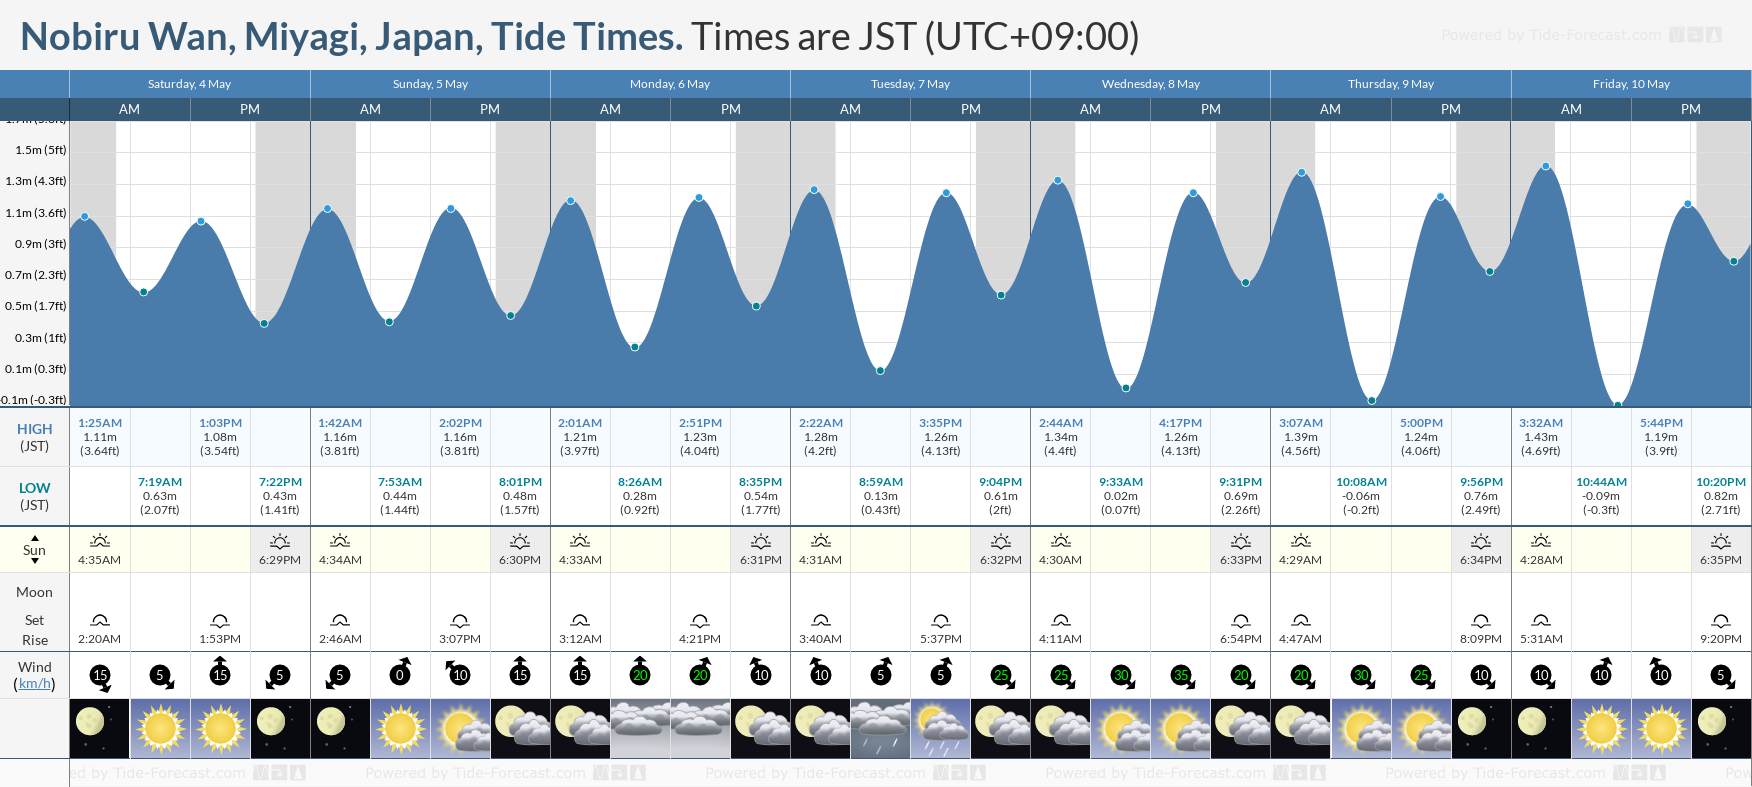 Nobiru Wan, Miyagi, Japan Tide Chart including high and low tide tide times for the next 7 days